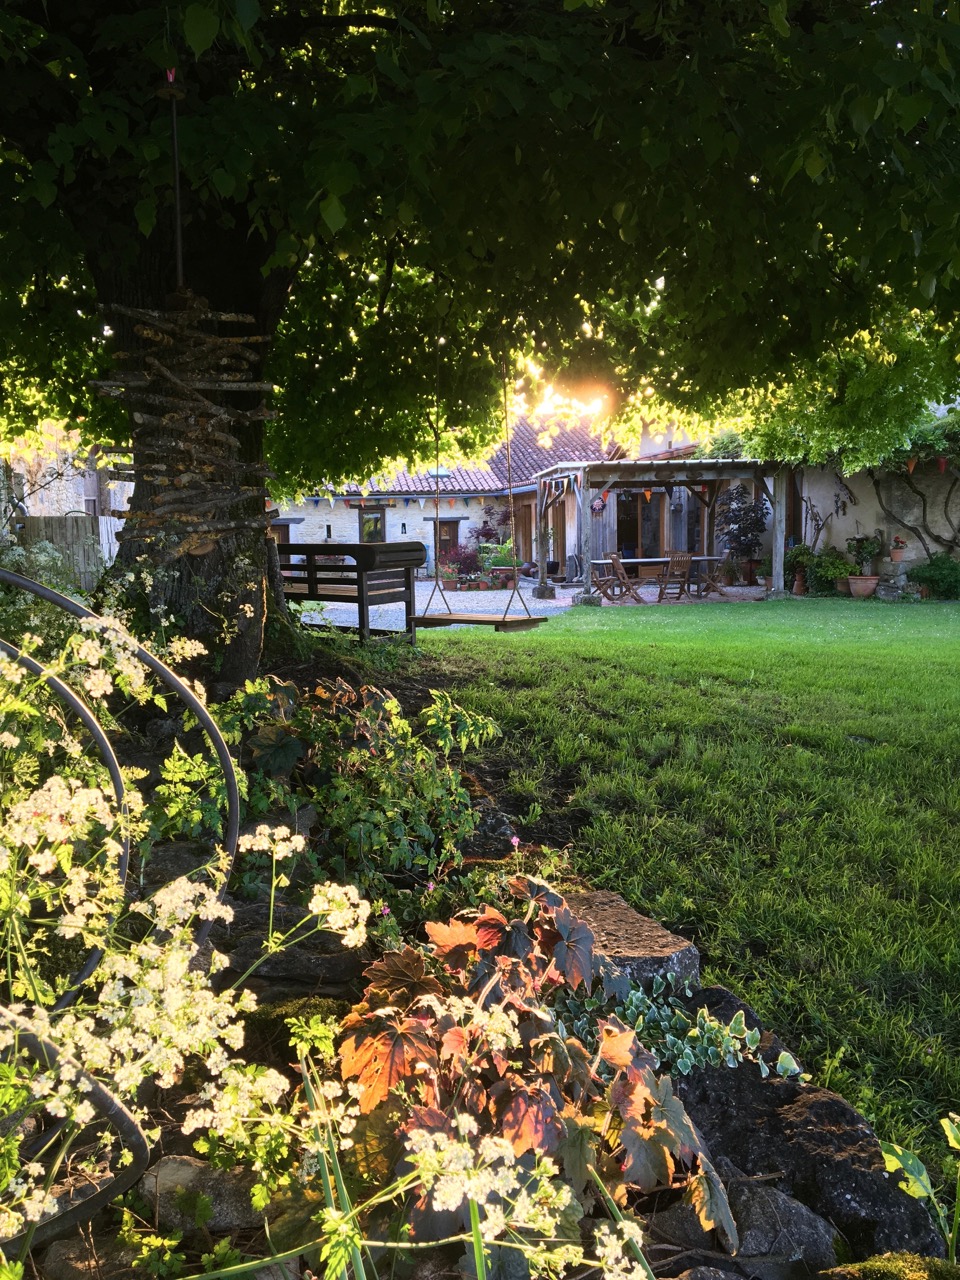 Farmhouse Vegetarian Bed and Breakfast, Cellefrouin, Charente